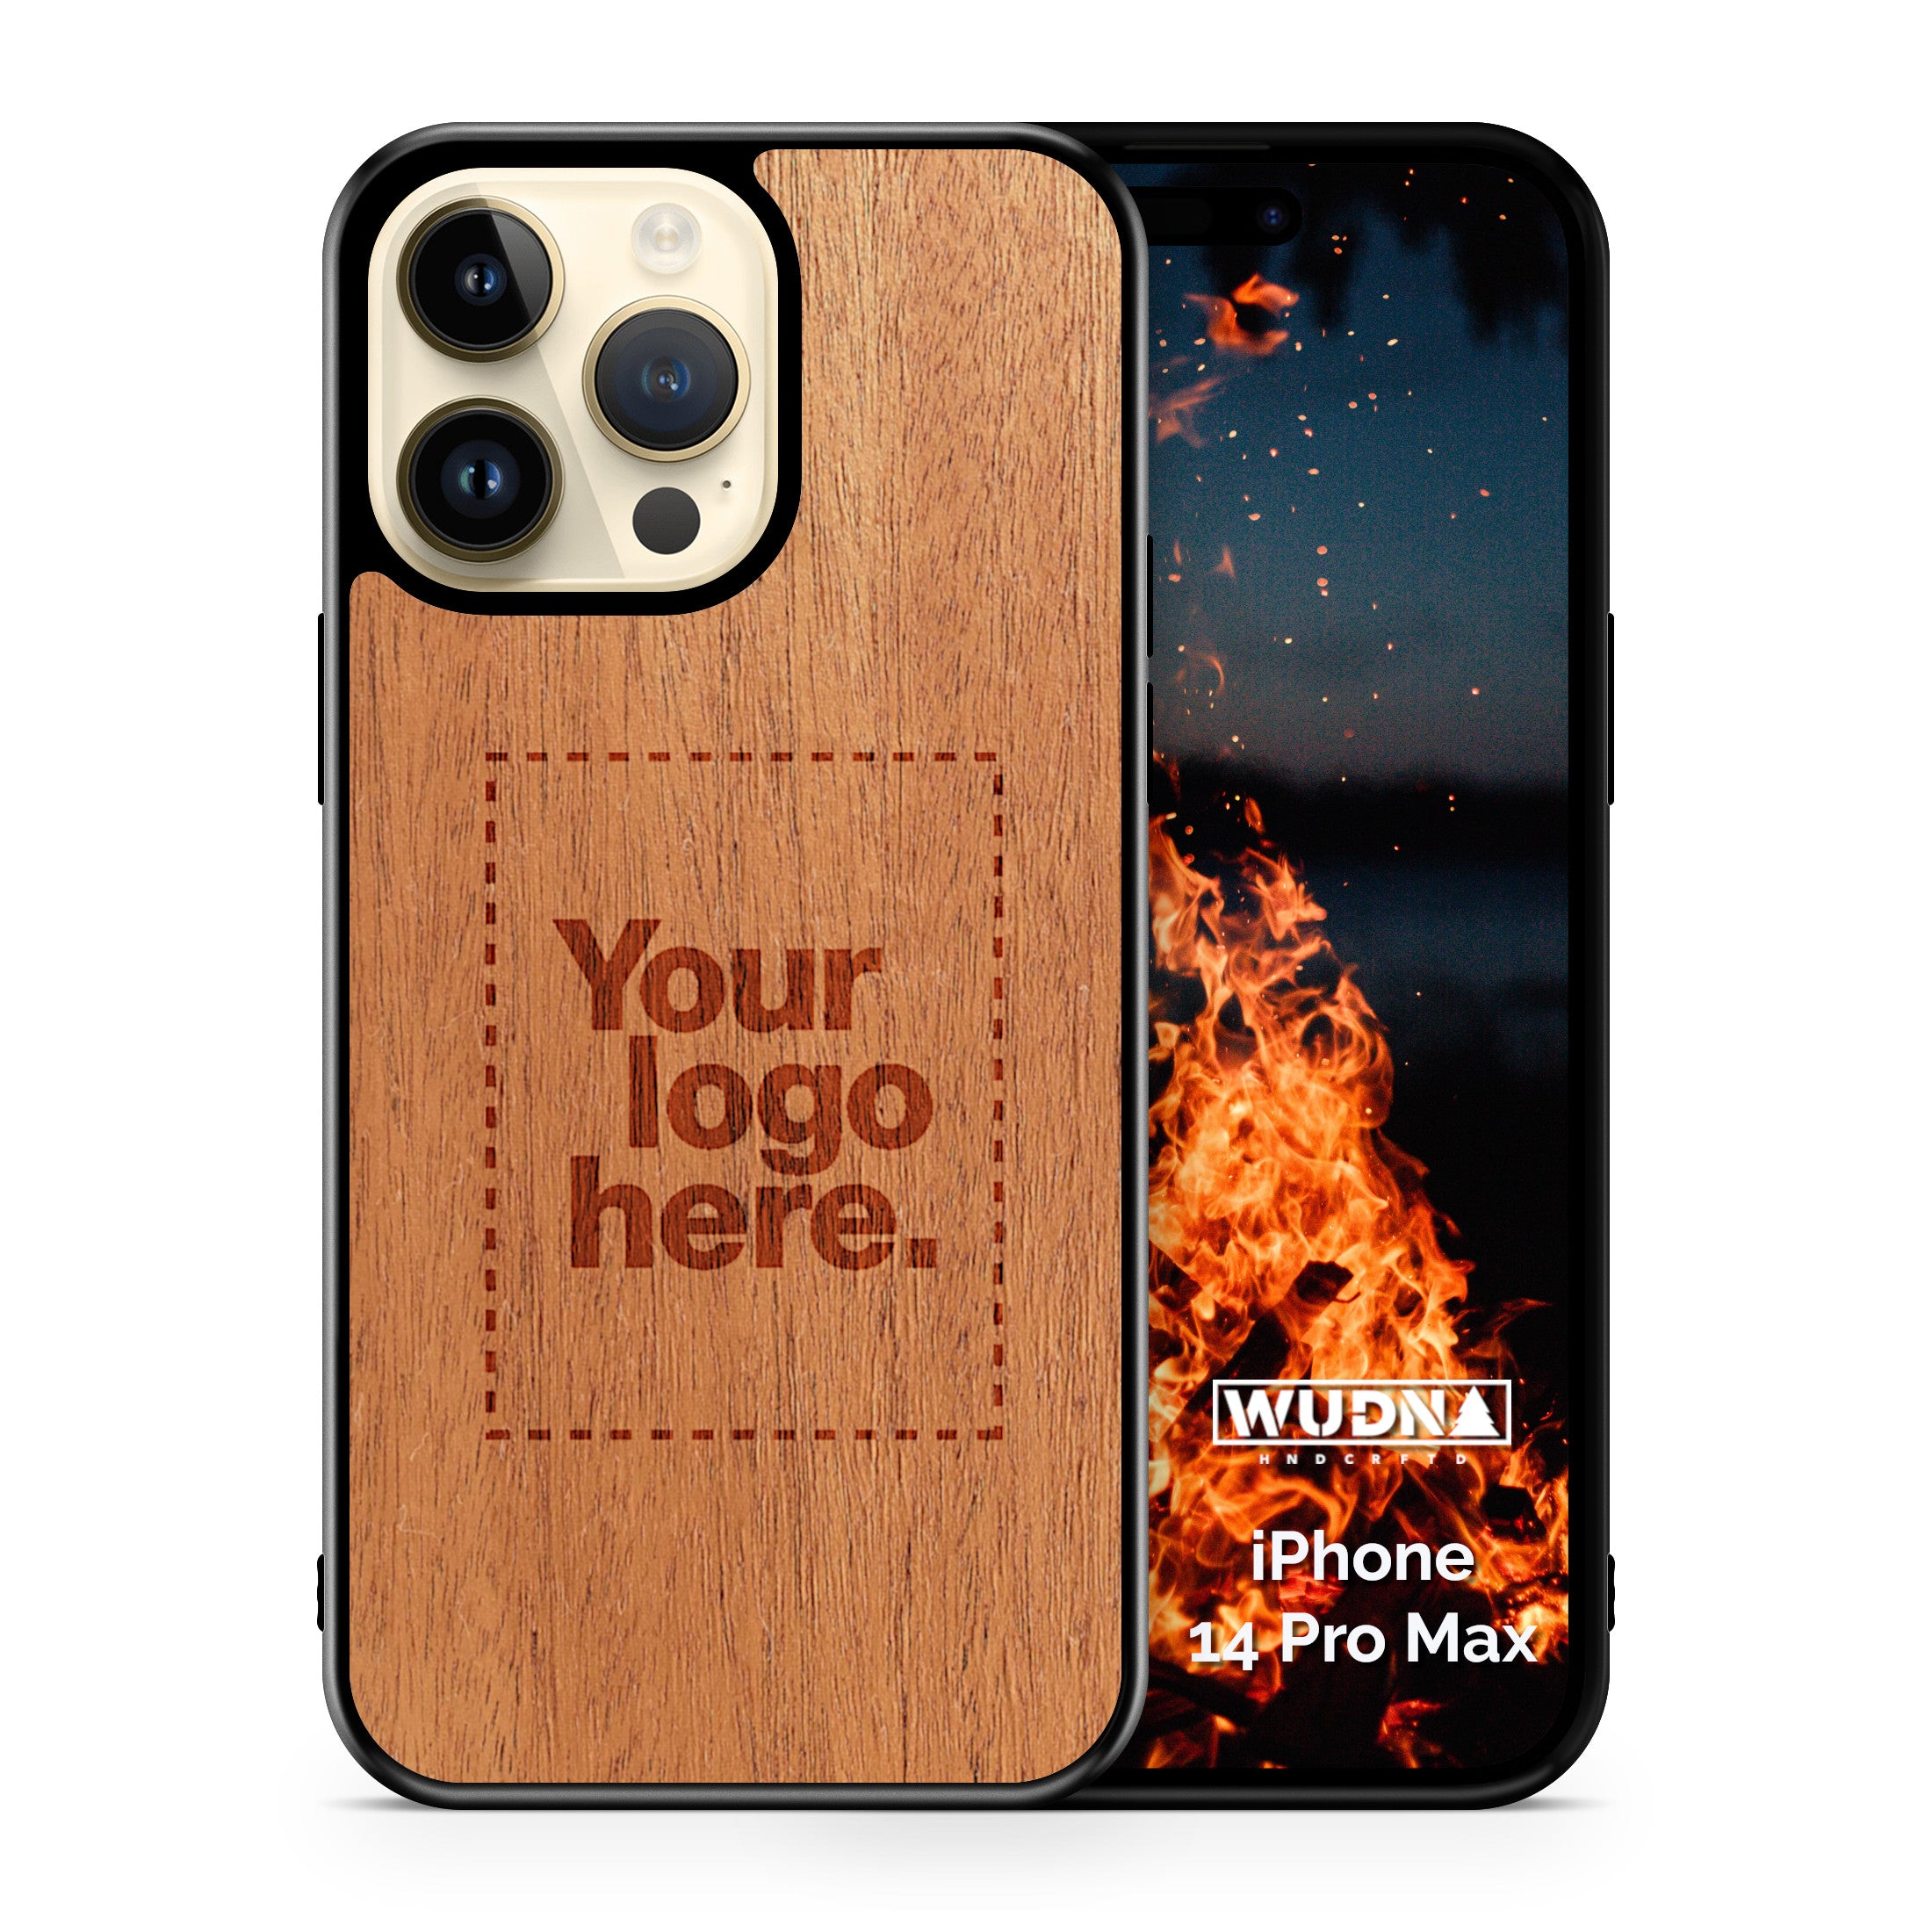 Apple iPhone 15 Pro Max black case with wood finishing and